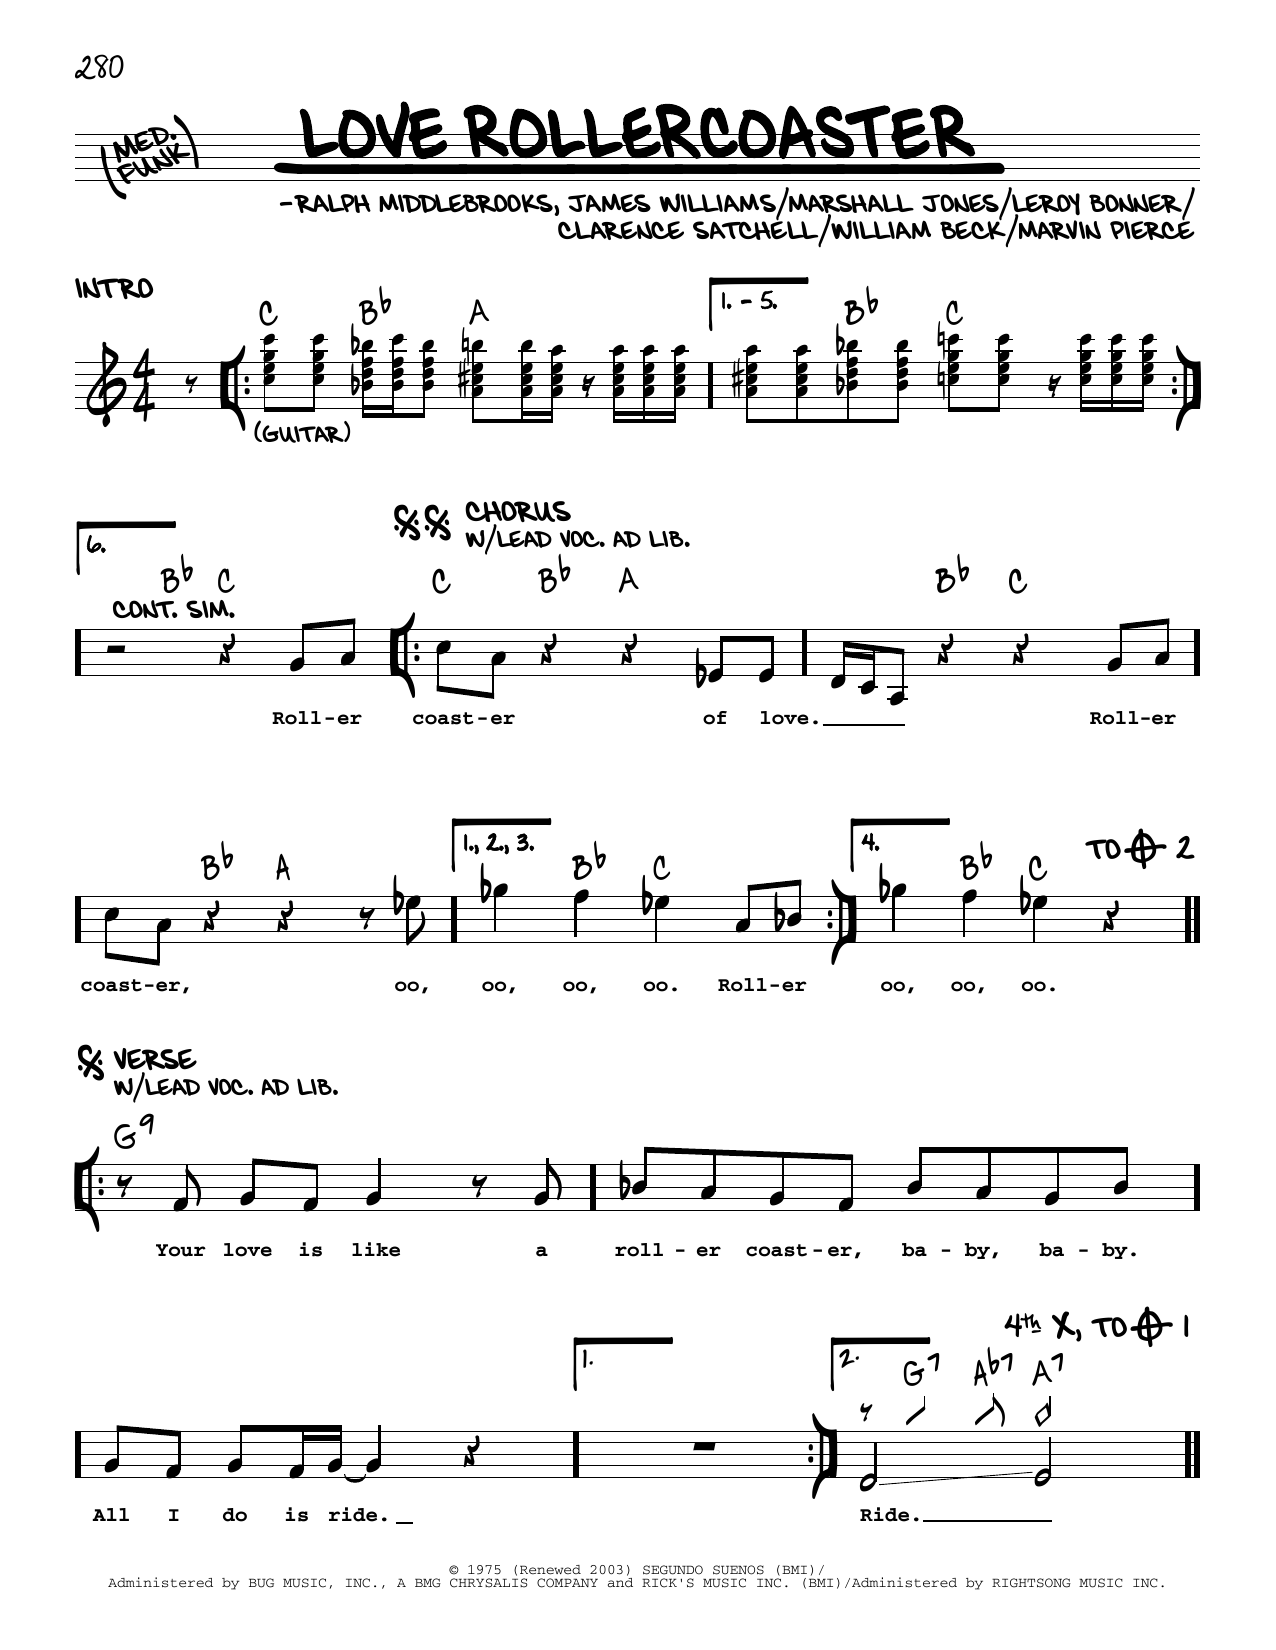 Download Ohio Players Love Rollercoaster Sheet Music